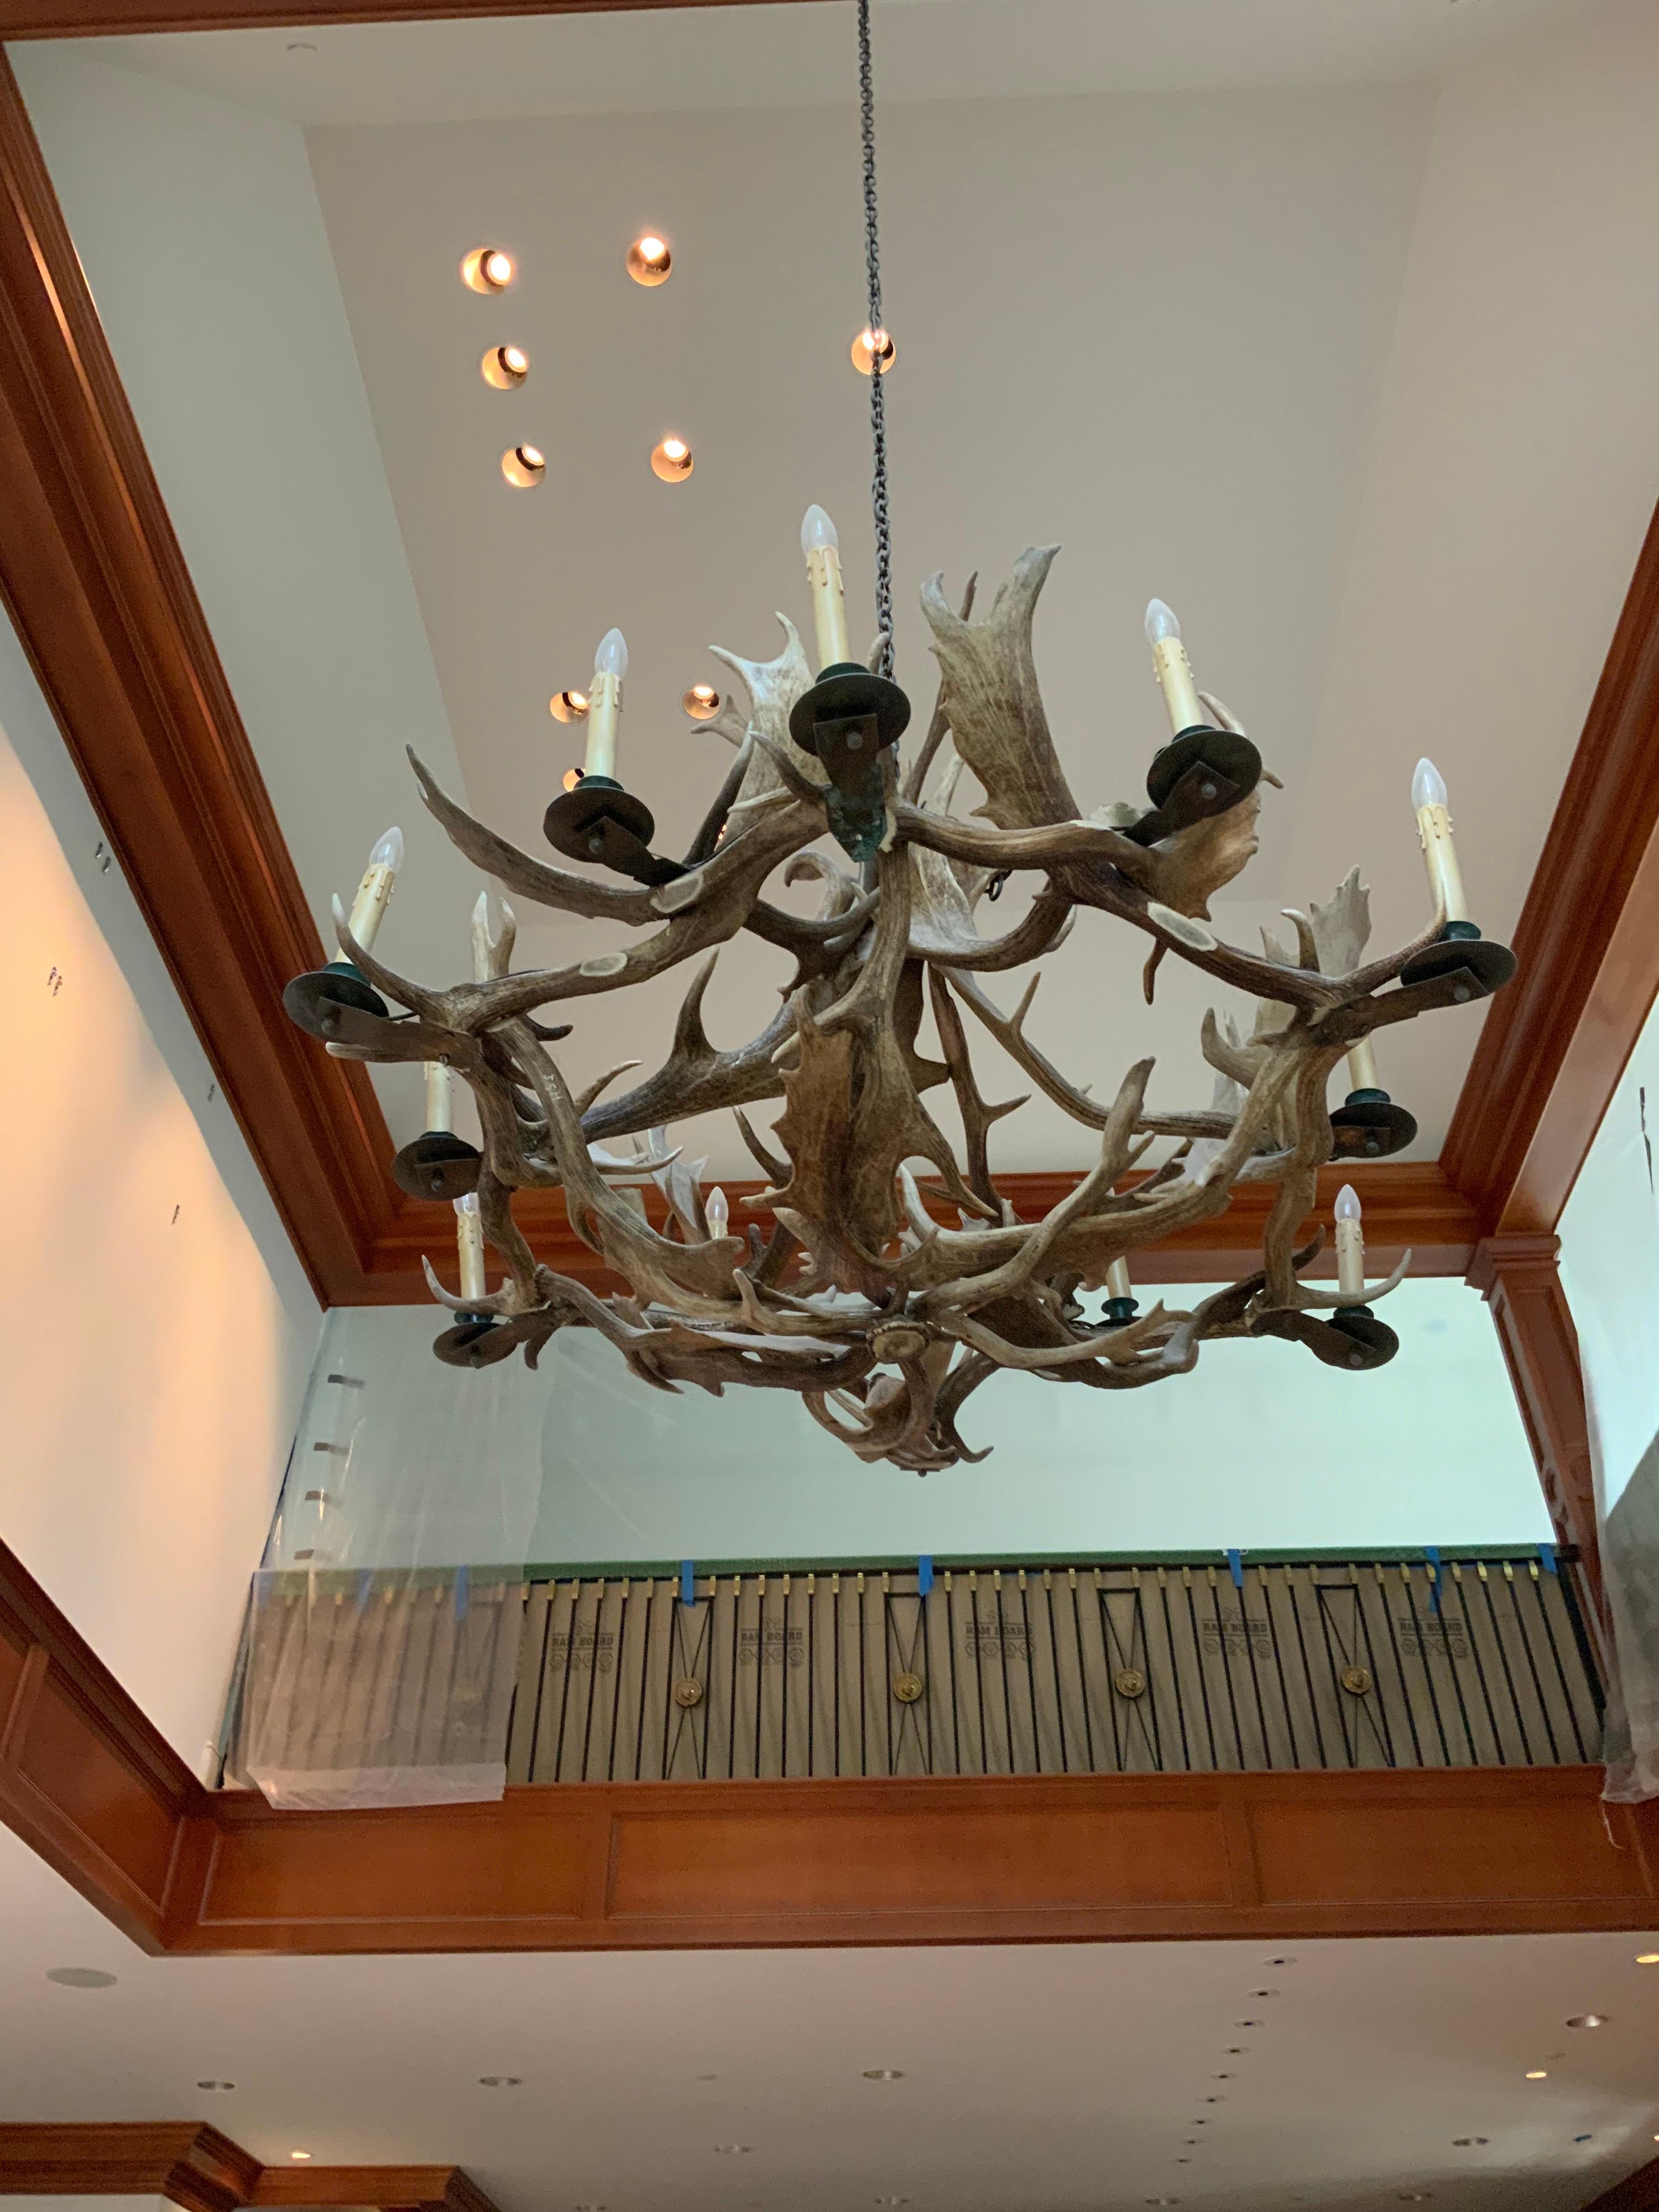 This Horns chandelier origins from North America.

19th century period.

Beautiful nature touch in your house.